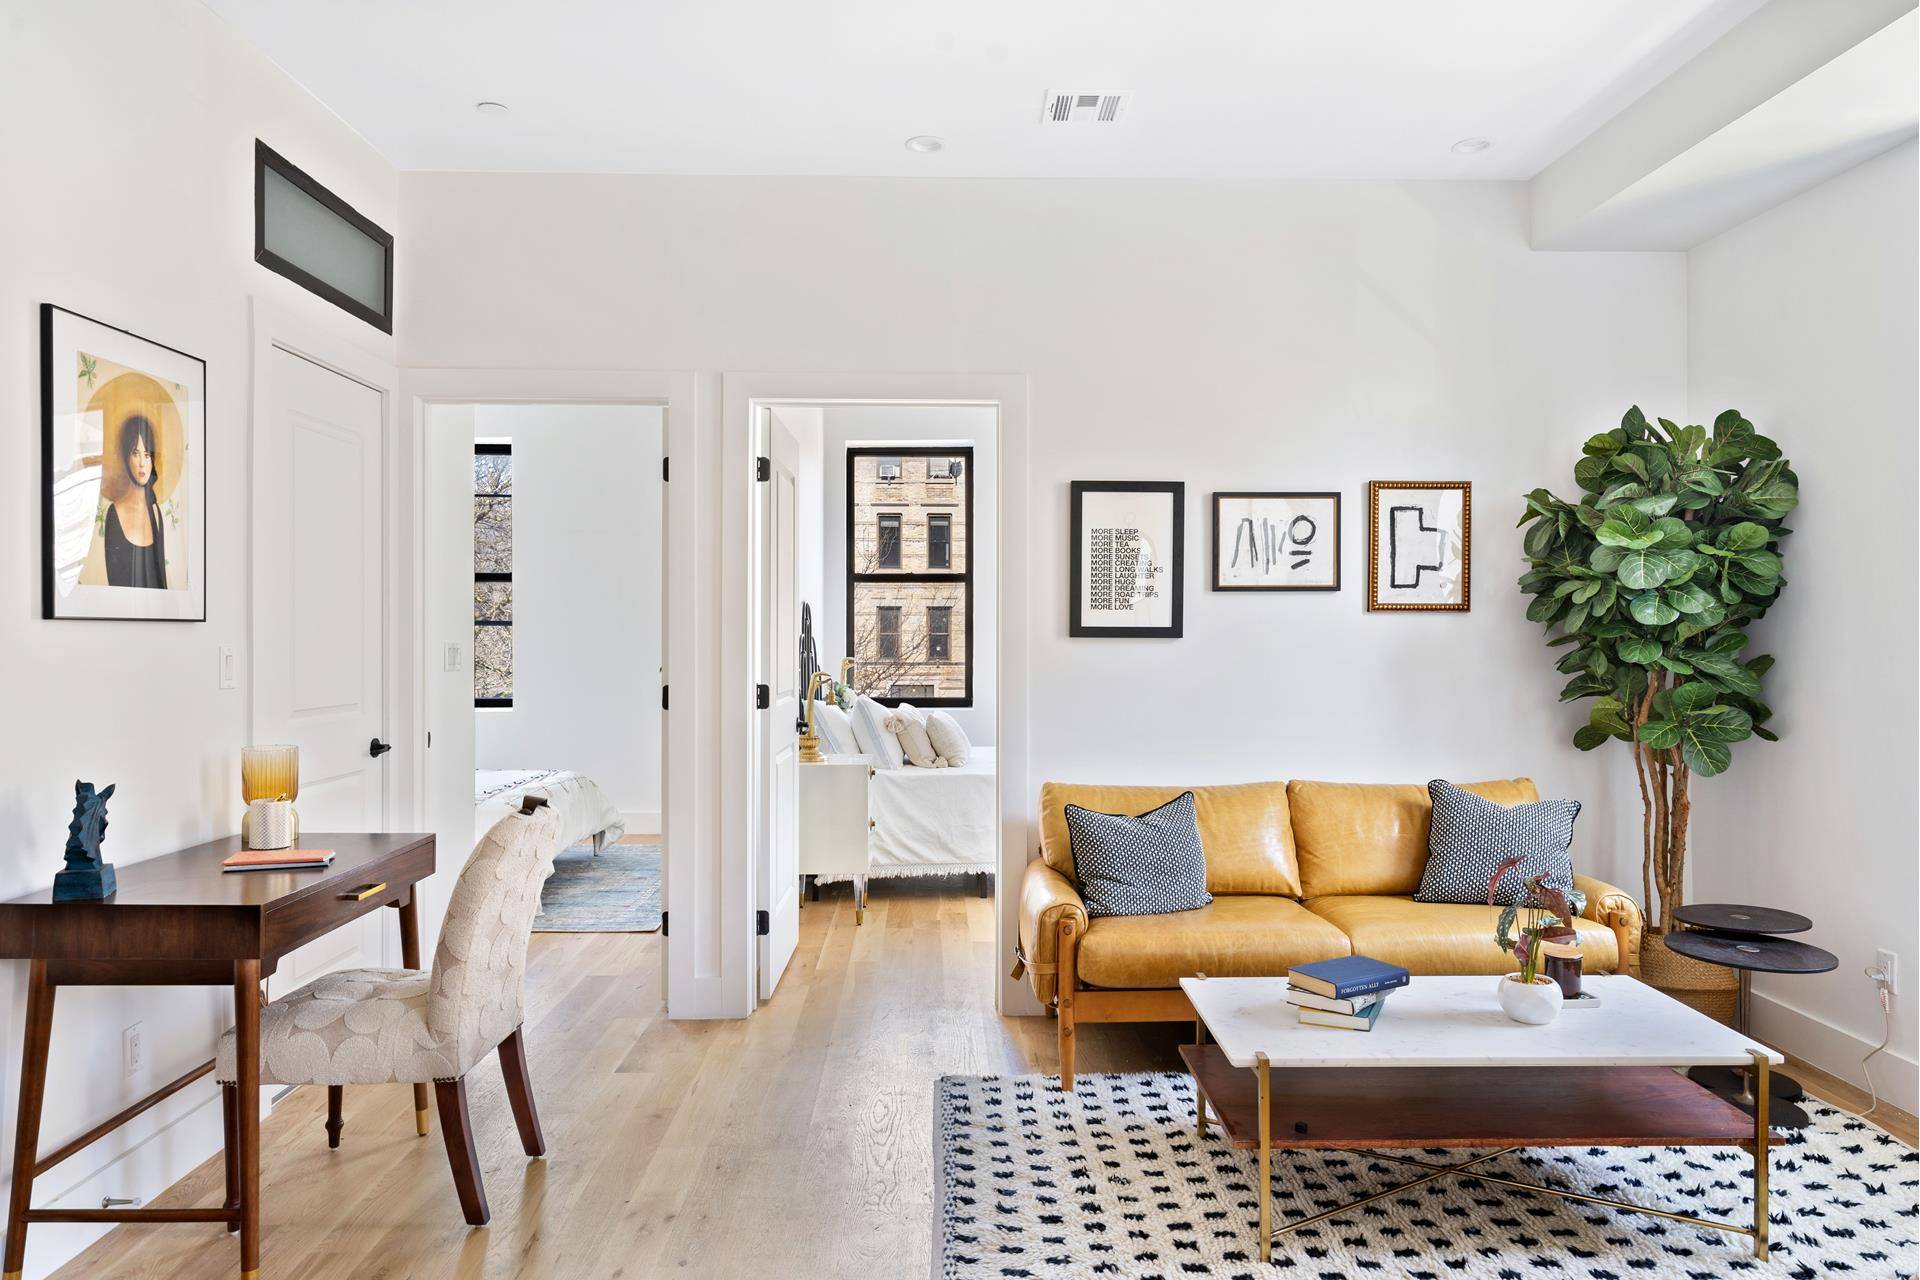 All Open Houses are by appointment Only Introducing 1474 Bushwick Ave an eight unit condo conversion with well appointed 2 bedroom contemporary units.